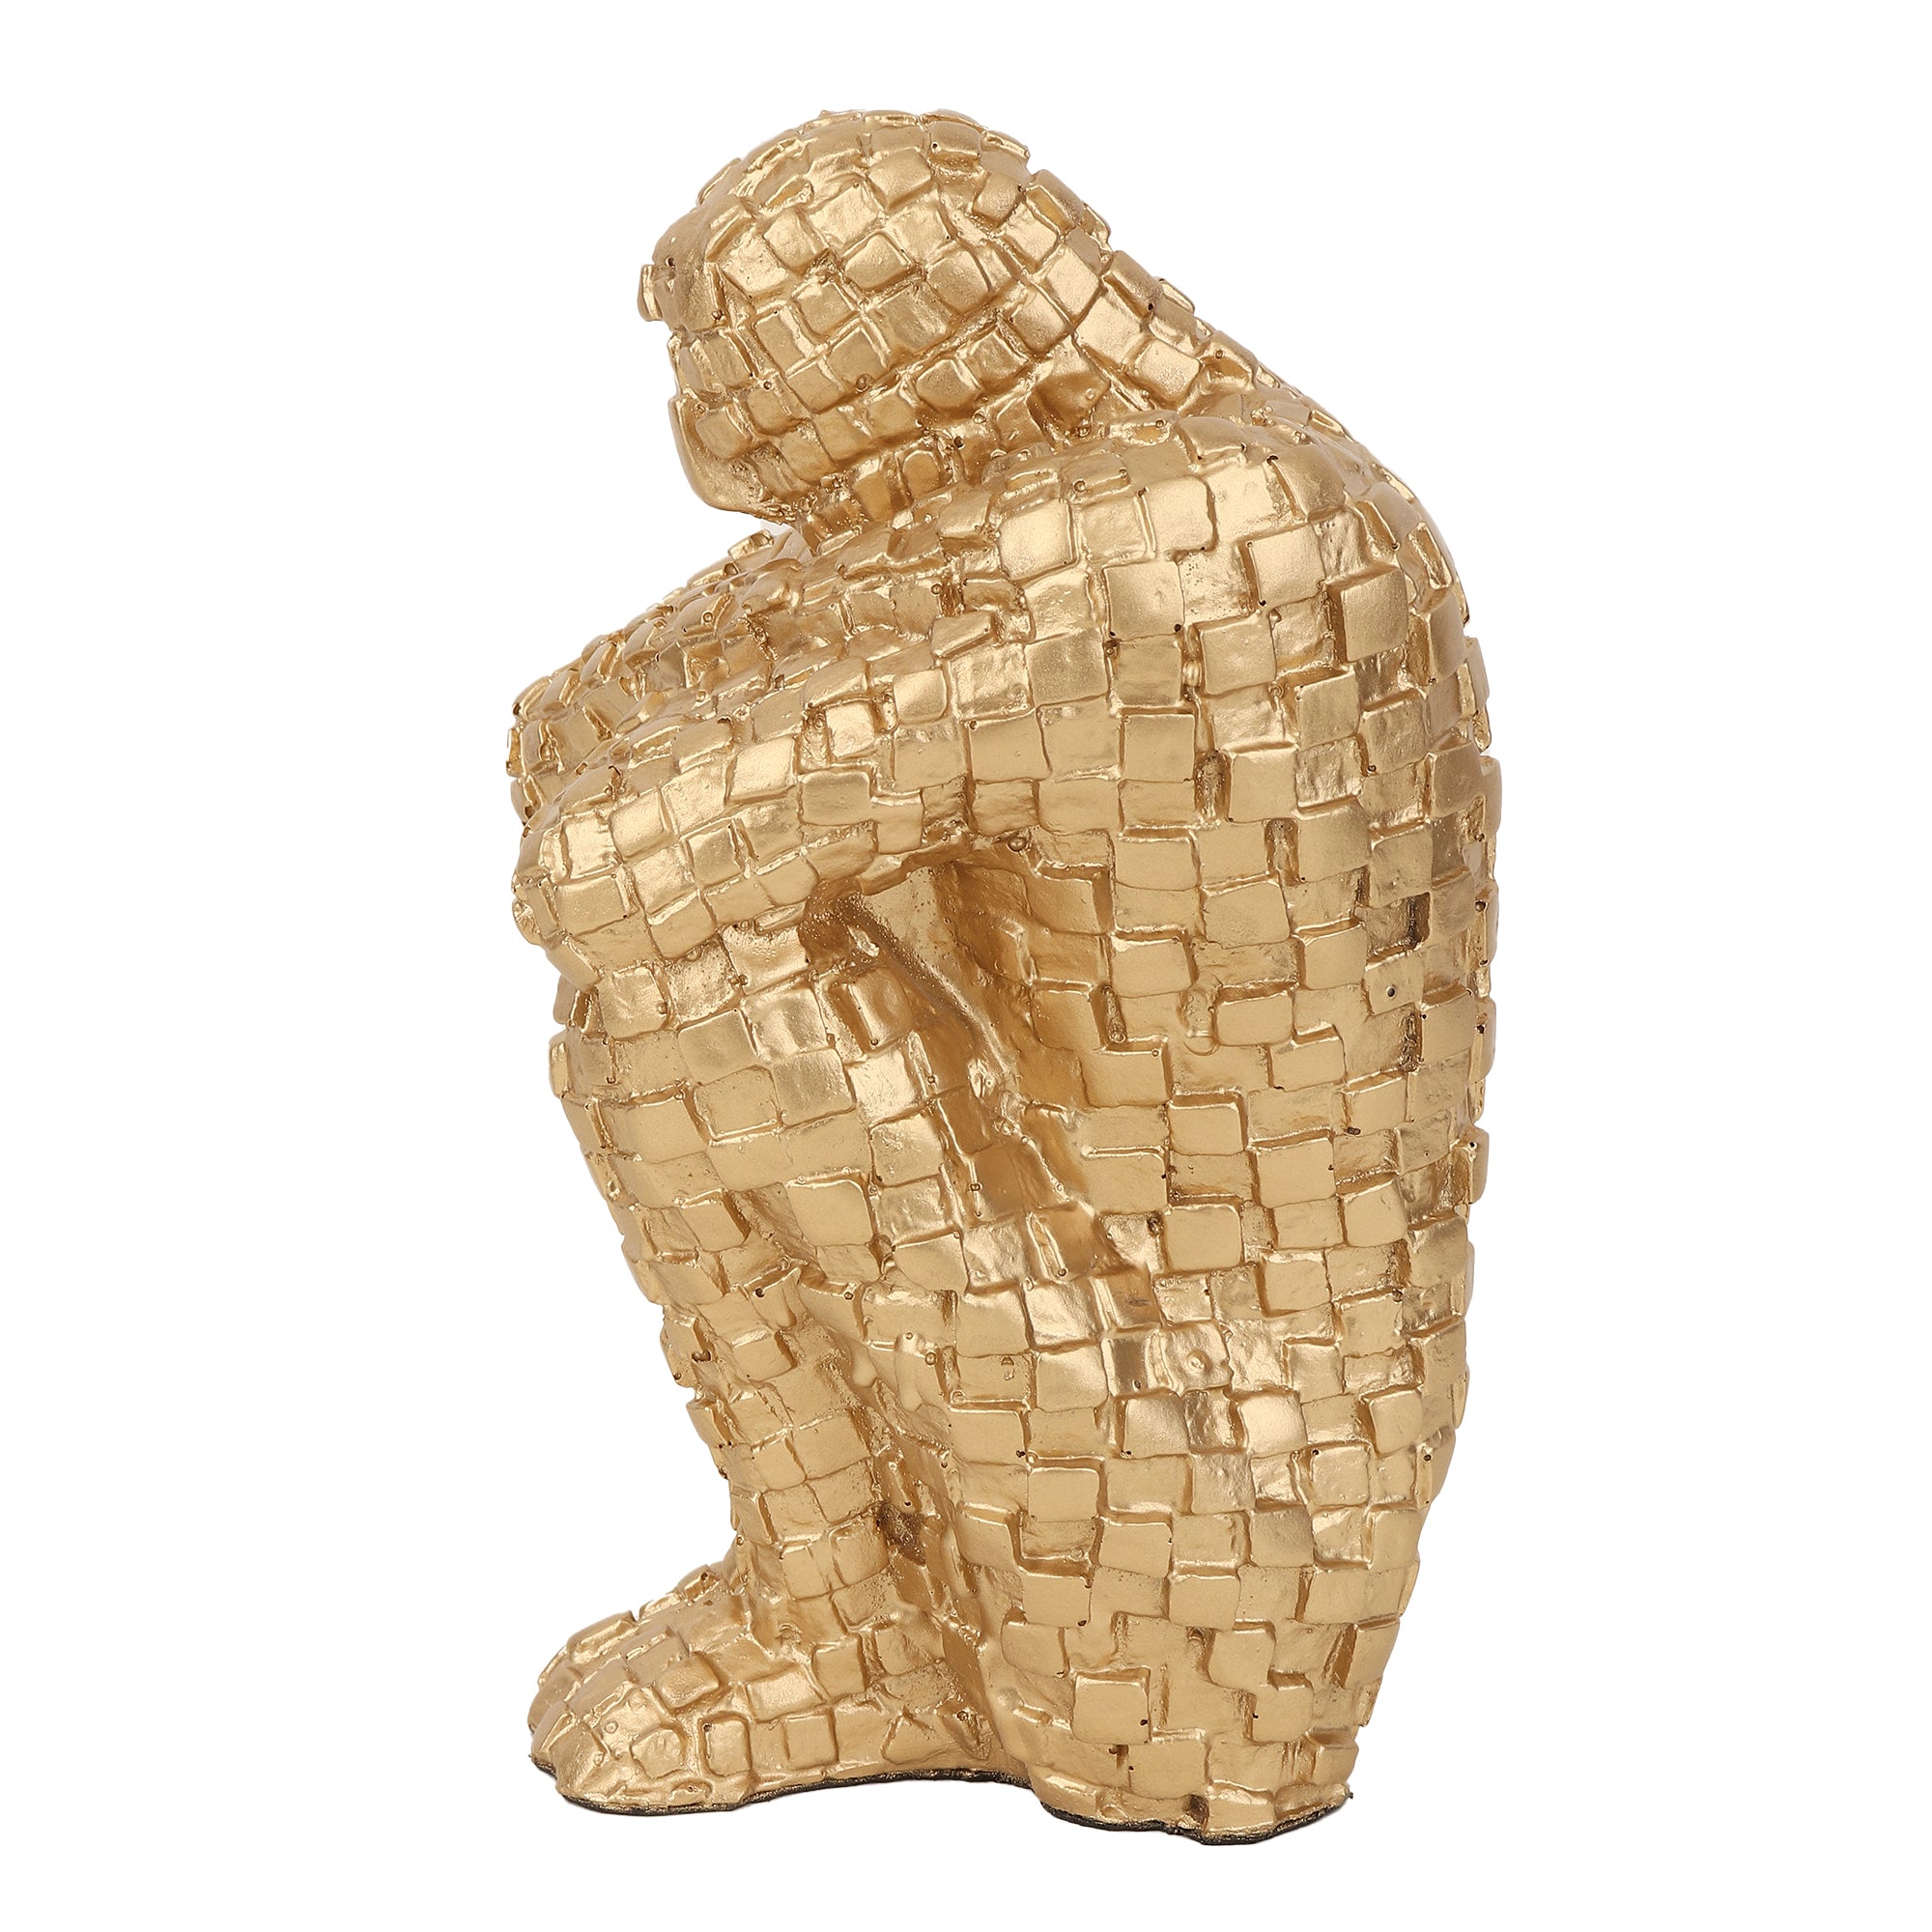 Secluded Thinker in Gold